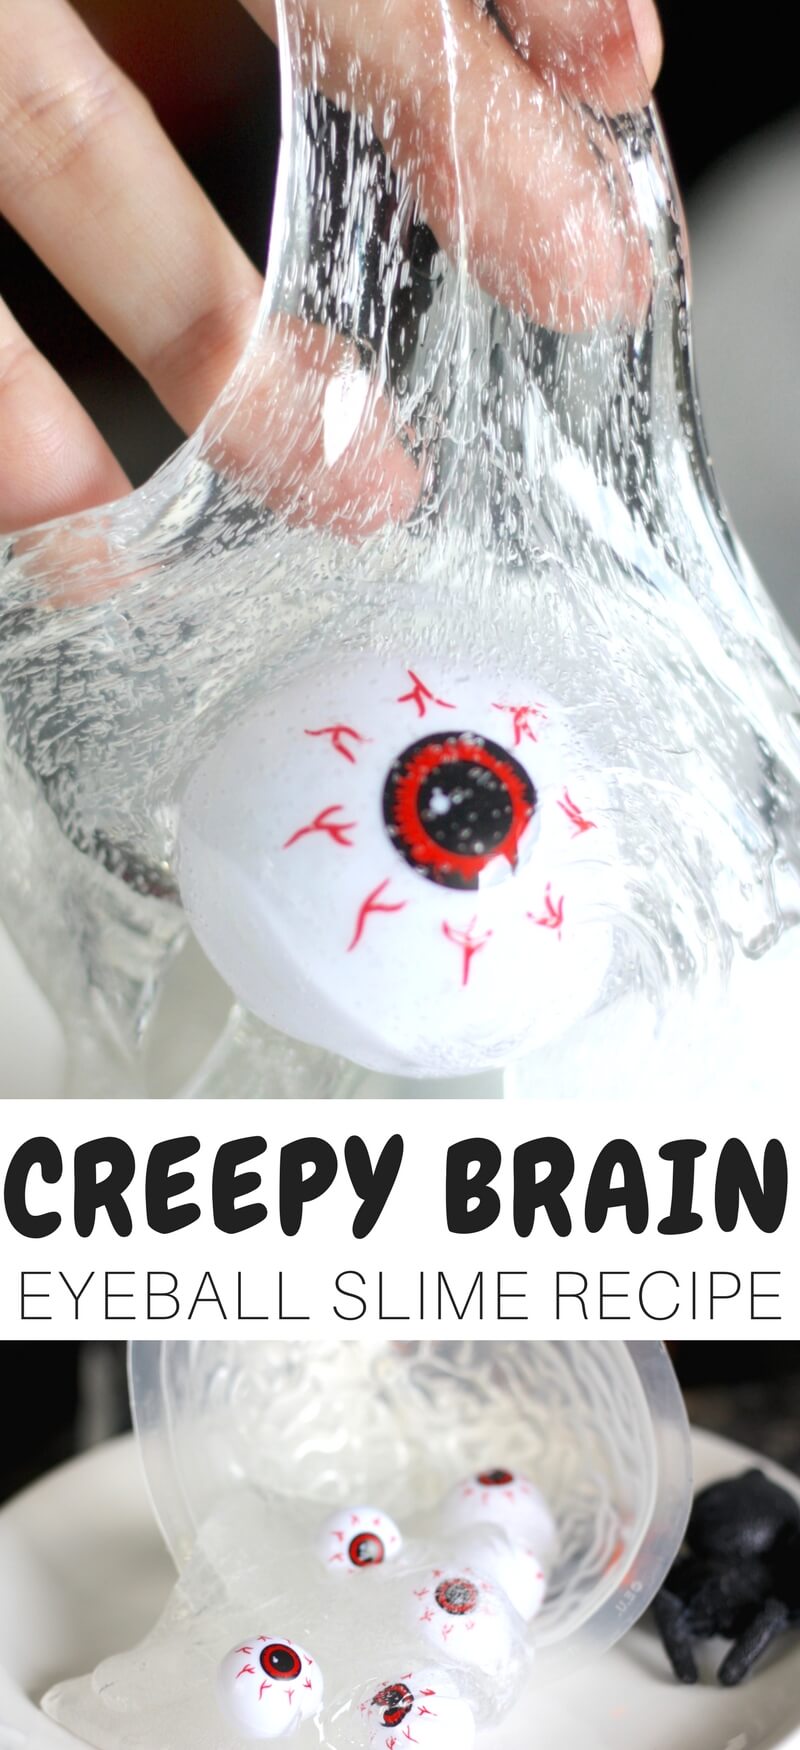 Easy homemade eyeball Halloween slime recipe and Halloween brain activity for kids! We love making slime and have many fun Halloween slime recipe ideas for kids to try at home including fluffy slime! Check out all of our Halloween slime recipes for creepy, gross, and cool science this Halloween season.